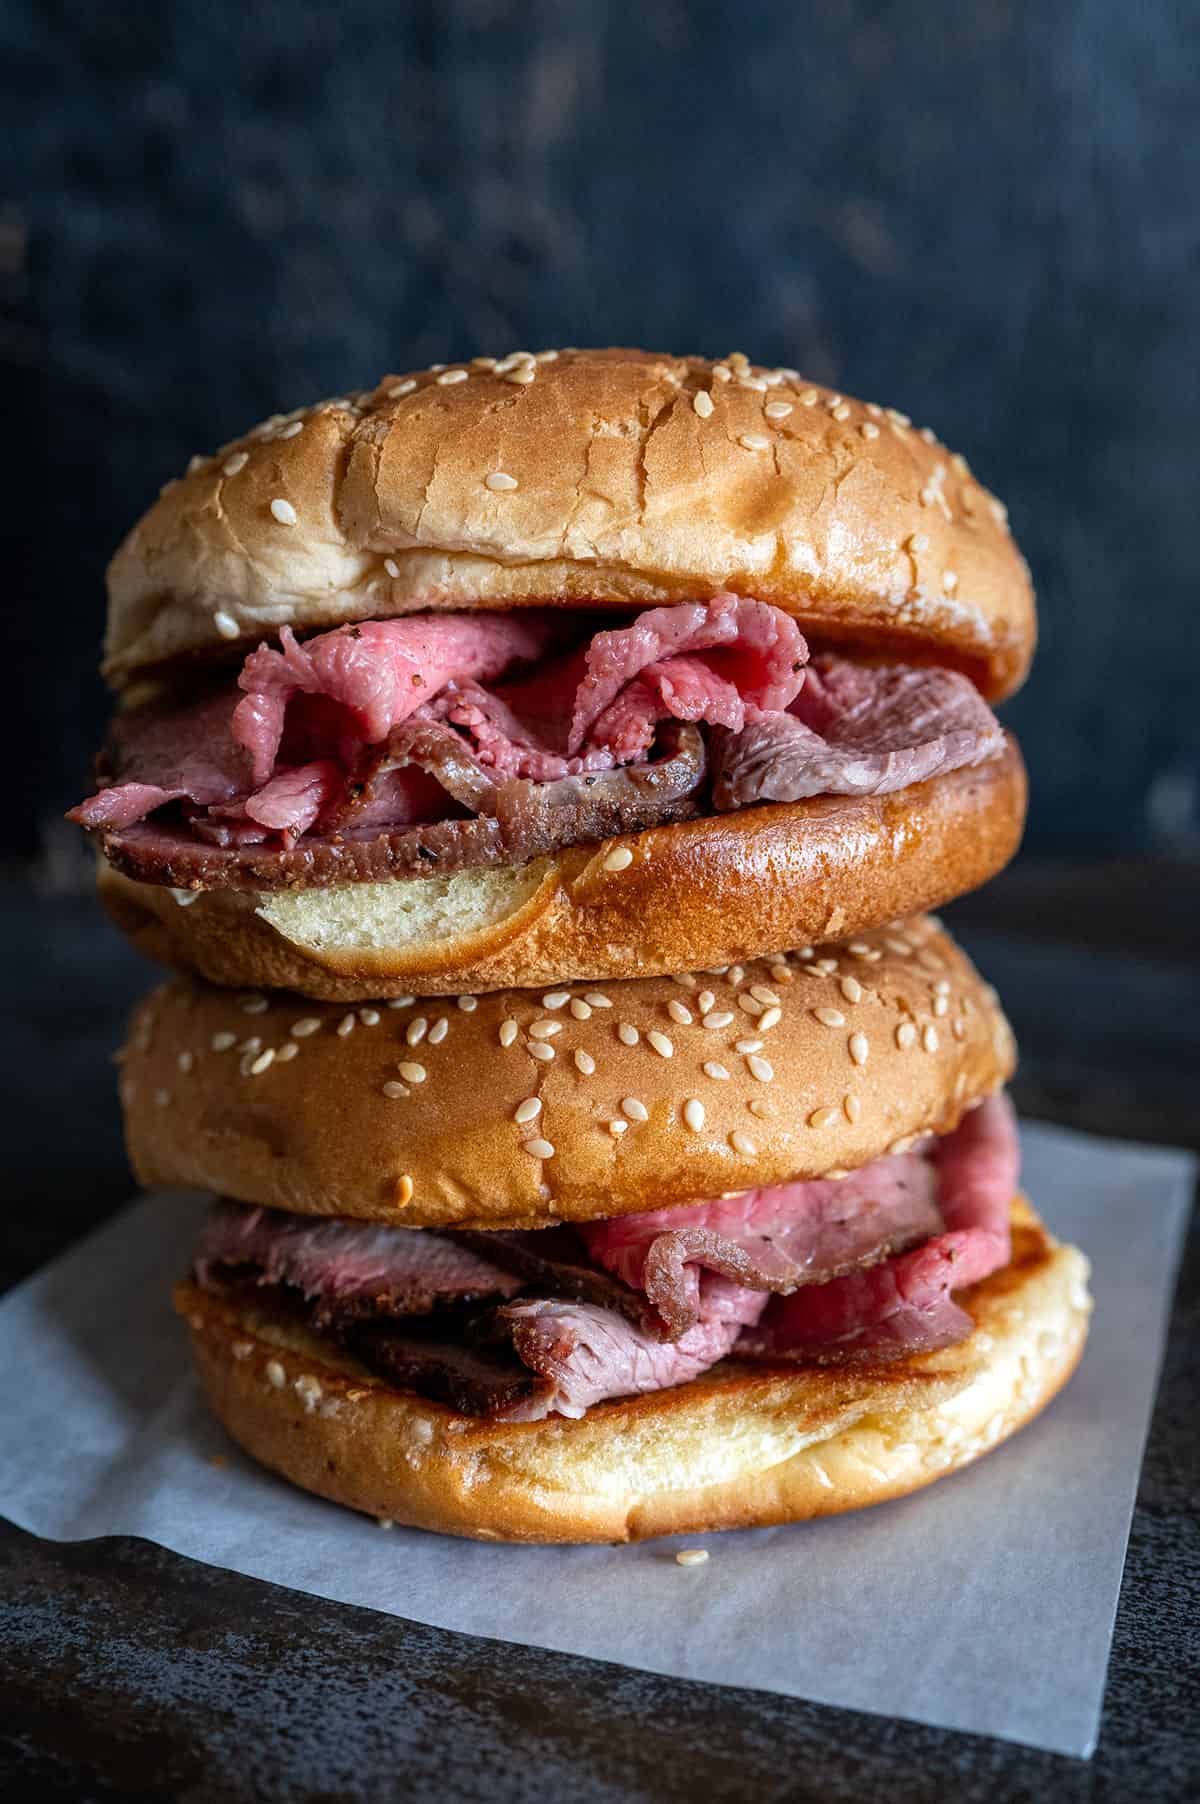 can i eat arbys roast beef while pregnant